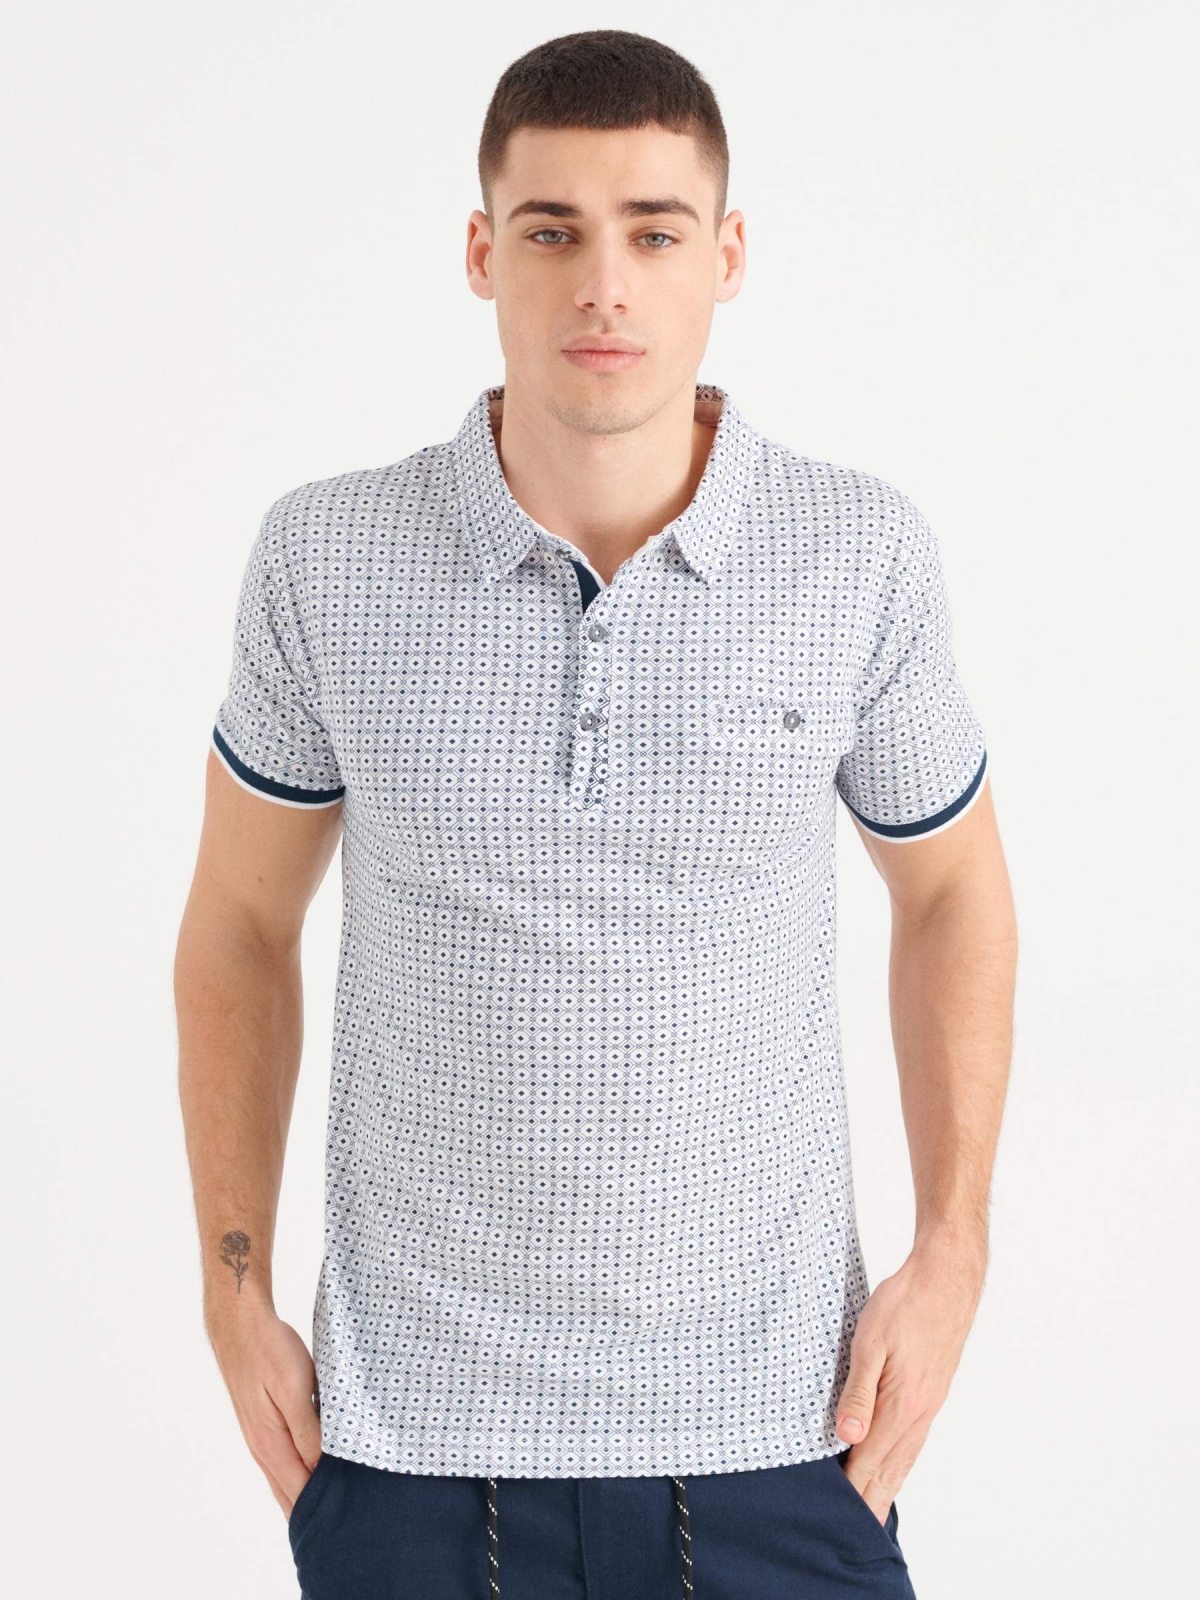 Jacquard polo shirt with pocket navy middle front view